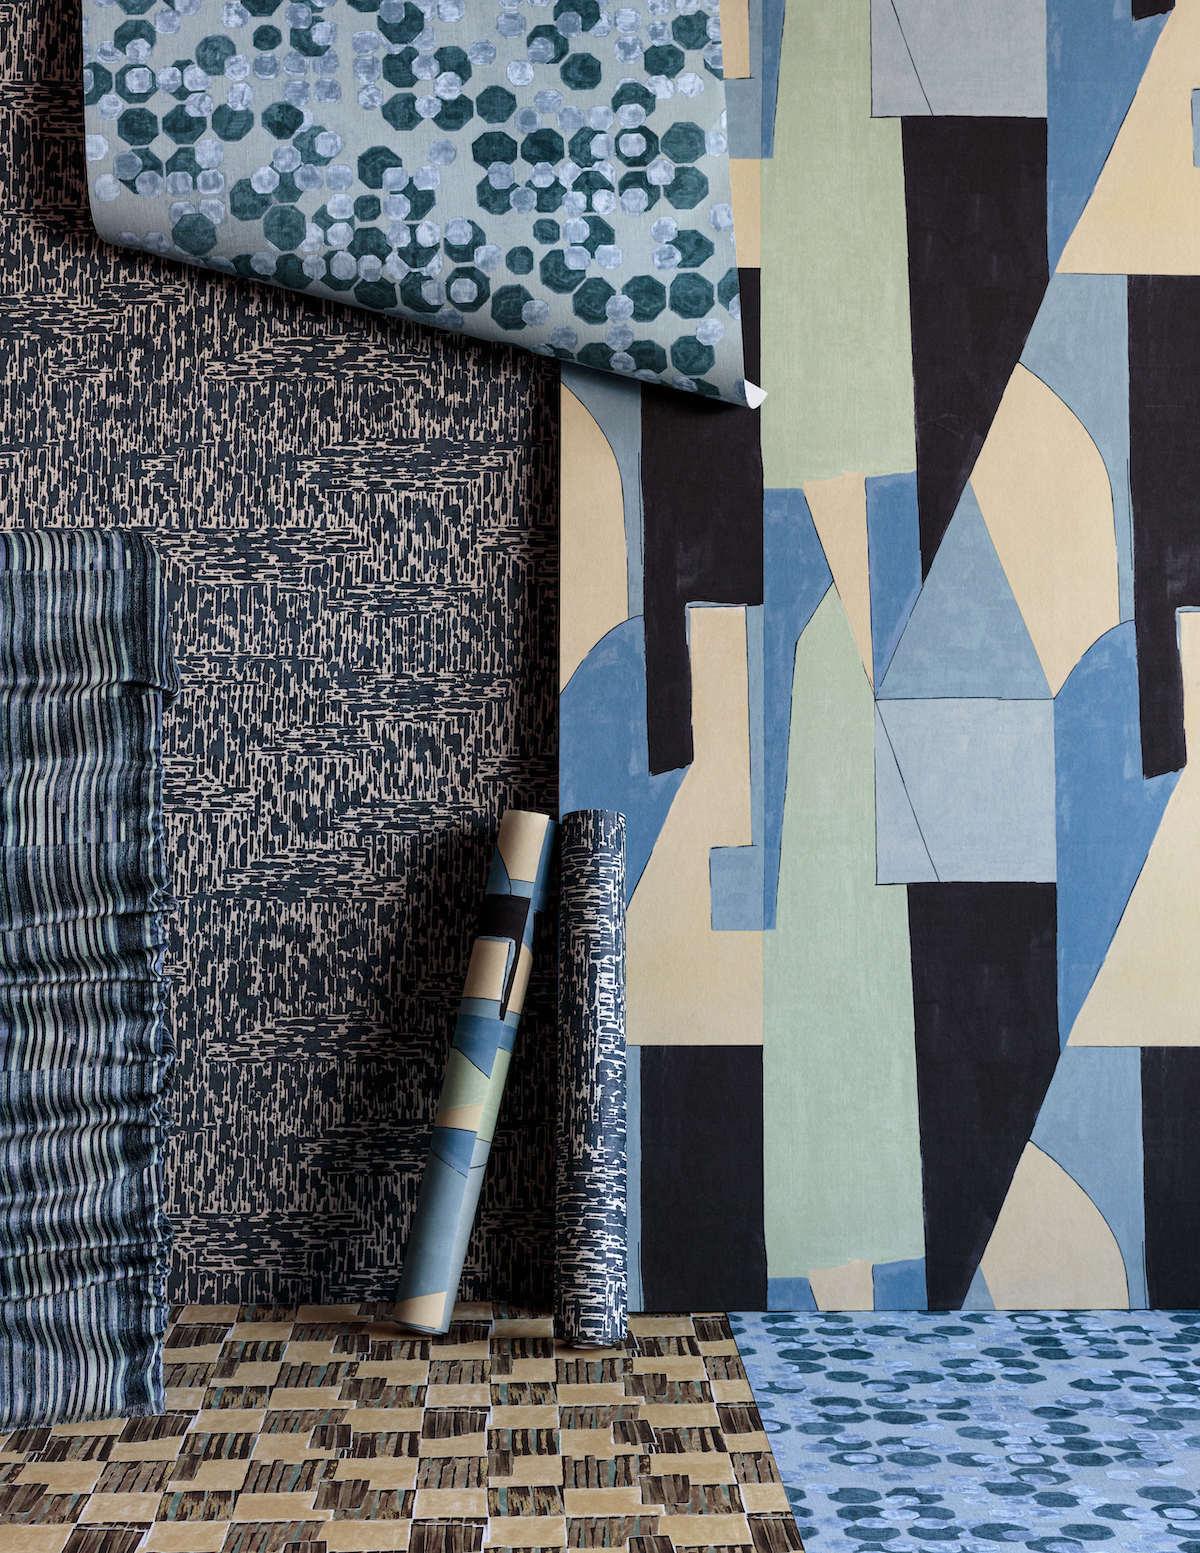 Weaving Magic: Inside Kelly Wearstler's Gorgeous New Fabric Collection for Lee Jofa